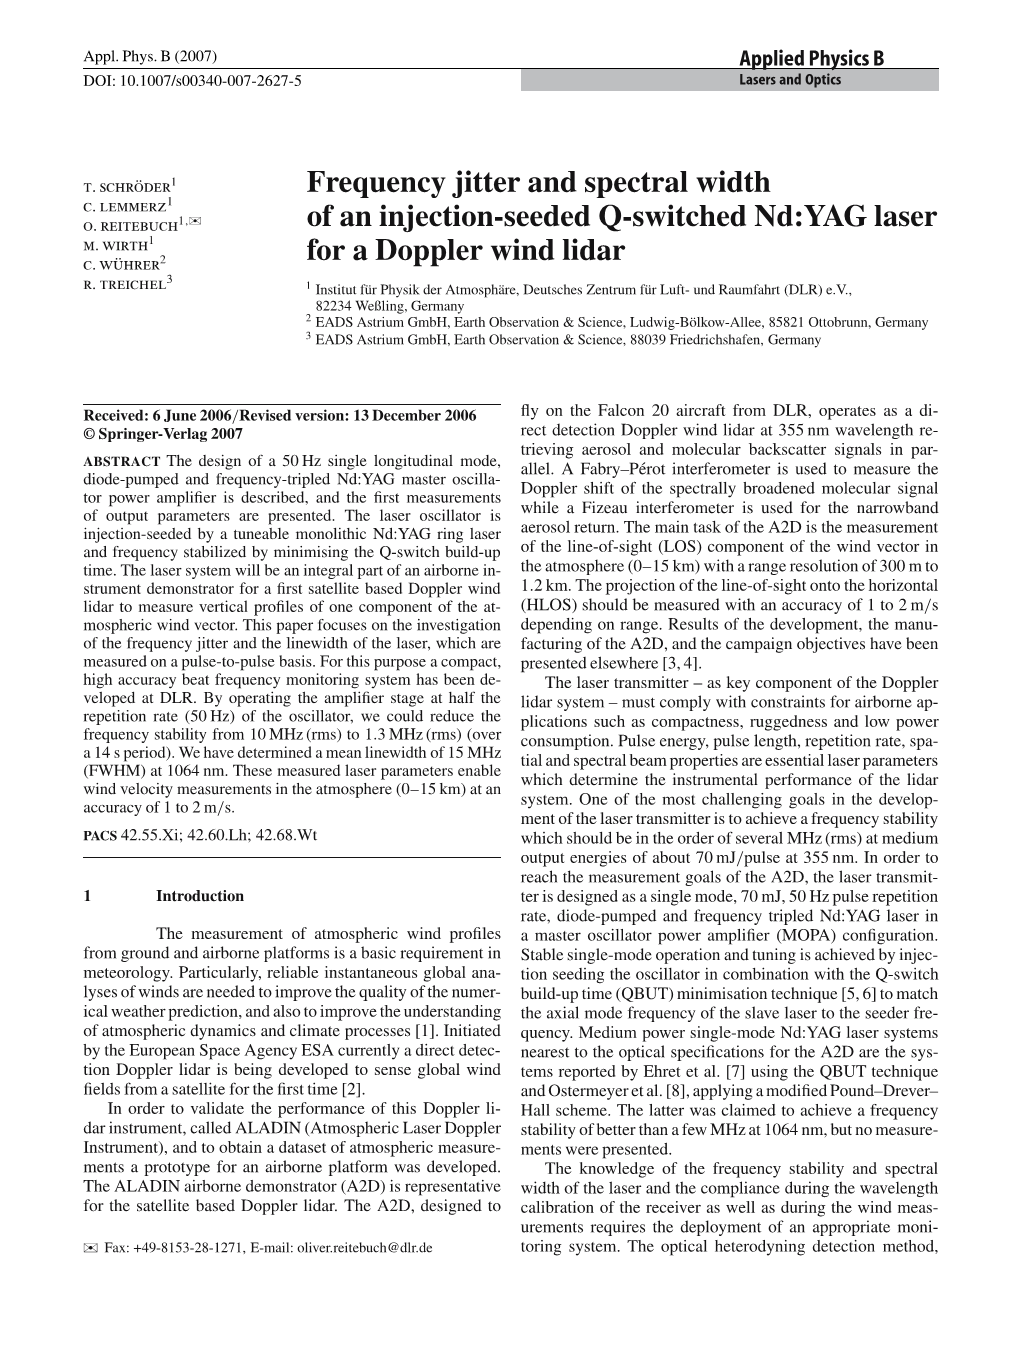 Frequency Jitter and Spectral Width of an Injection-Seeded Q-Switched Nd:YAG Laser for a Doppler Wind Lidar a Frequency Stabilisation Scheme